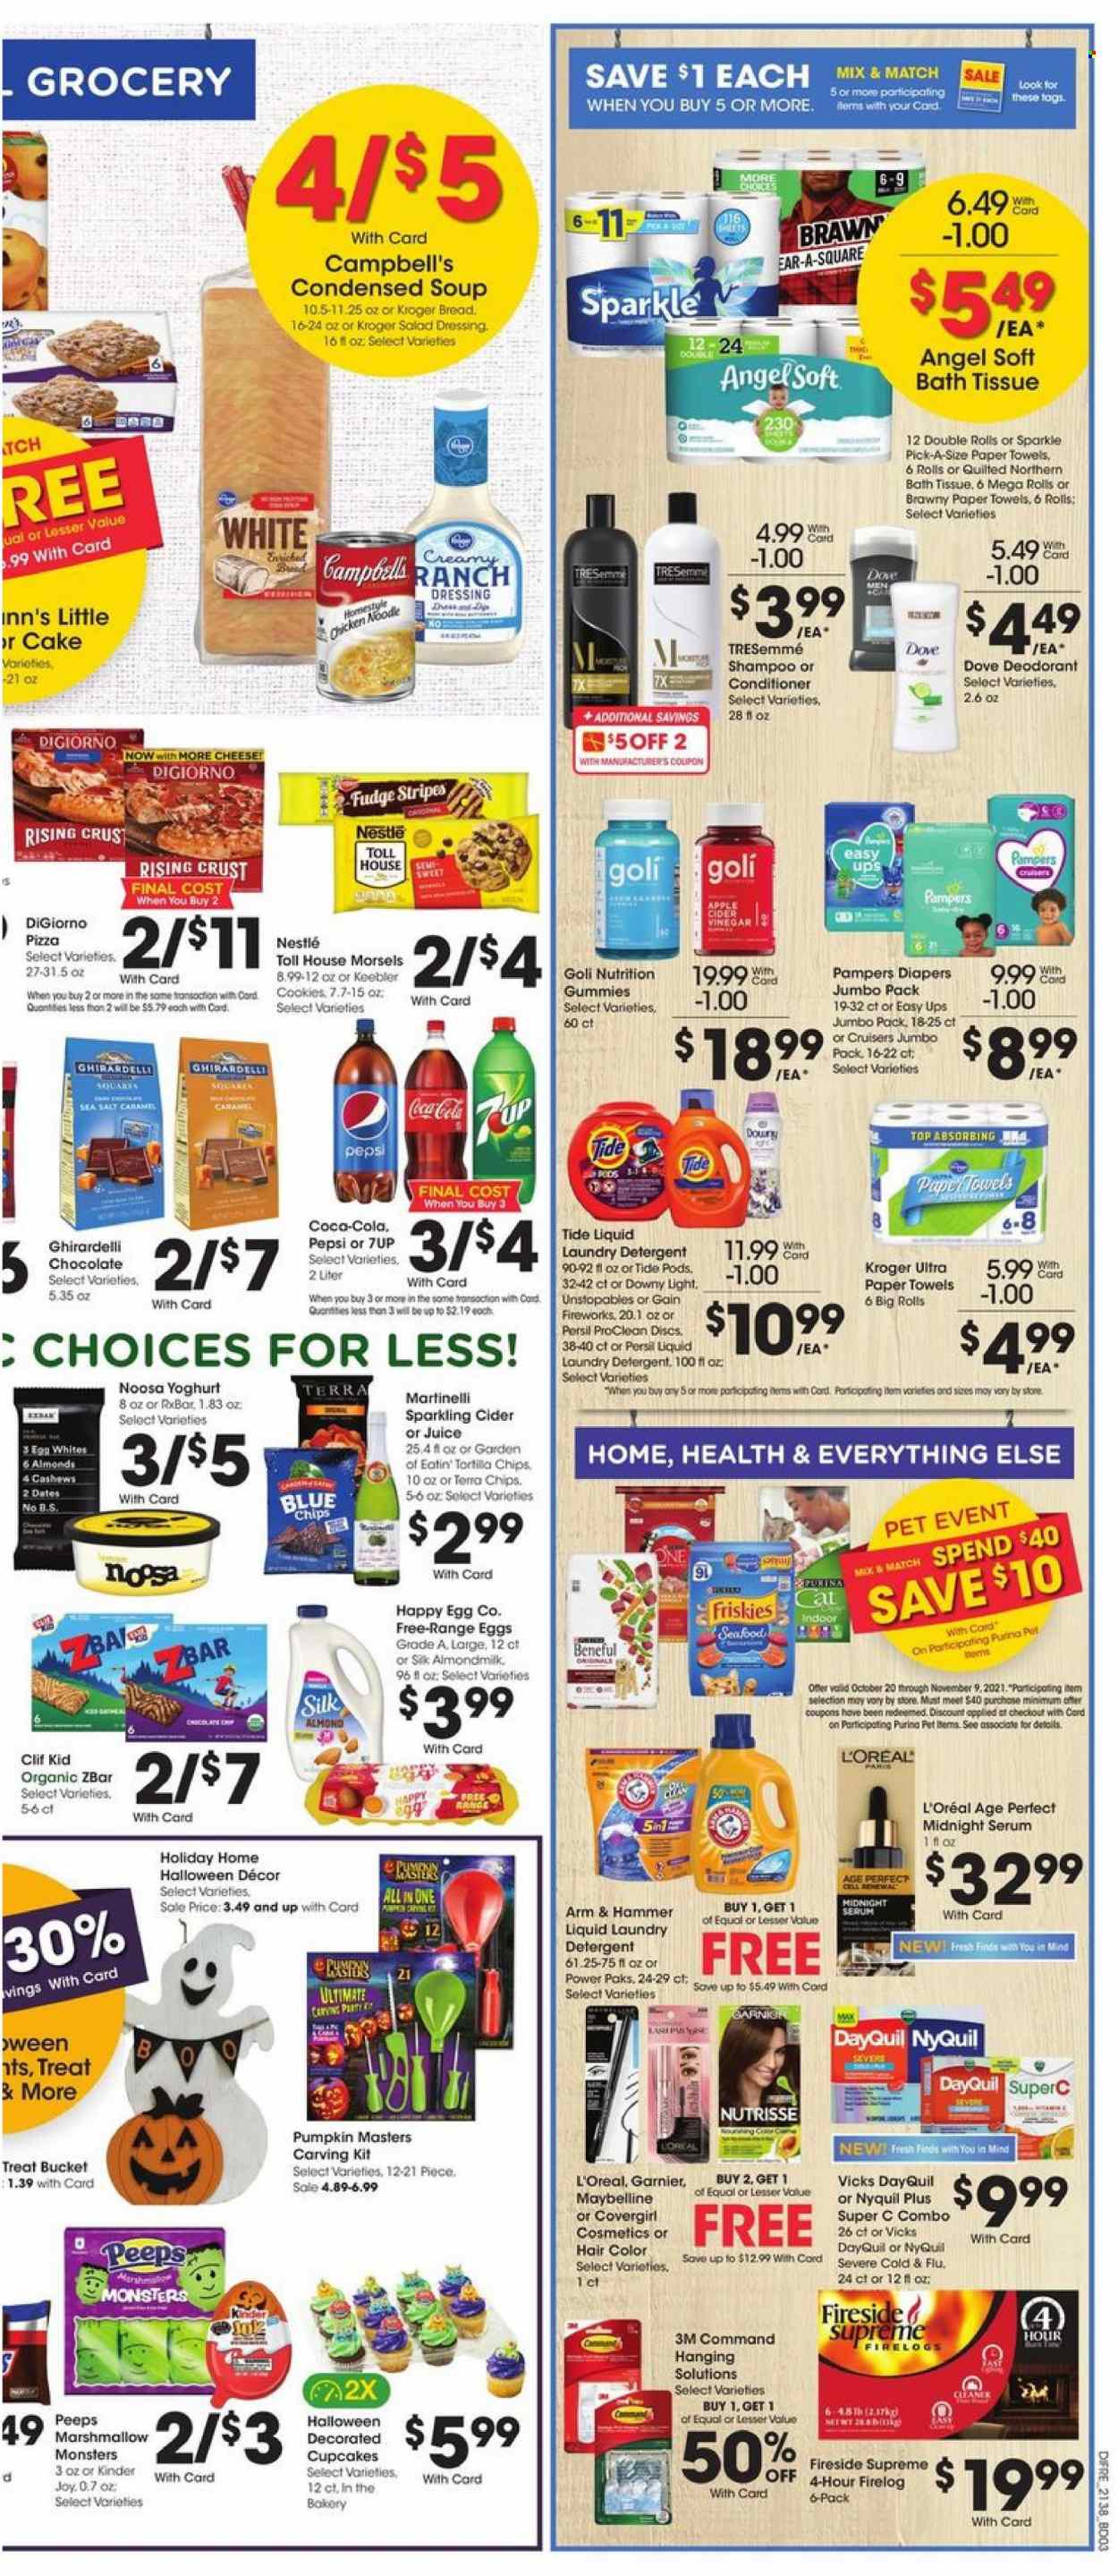 thumbnail - Baker's Flyer - 10/20/2021 - 10/26/2021 - Sales products - bread, cupcake, pumpkin, Campbell's, pizza, condensed soup, soup, instant soup, yoghurt, almond milk, Silk, eggs, cookies, fudge, marshmallows, Nestlé, chocolate, Kinder Joy, Ghirardelli, Keebler, Peeps, tortilla chips, chips, ARM & HAMMER, salad dressing, dressing, apple cider vinegar, Coca-Cola, Pepsi, juice, 7UP, sparkling cider, sparkling wine, cider, nappies, Dove, bath tissue, Quilted Northern, kitchen towels, paper towels, detergent, Gain, cleaner, Tide, Unstopables, Persil, laundry detergent, Gain Fireworks, shampoo, Garnier, L’Oréal, serum, conditioner, TRESemmé, hair color, anti-perspirant, deodorant, Vicks, Maybelline, Purina, Friskies, Halloween, DayQuil, Cold & Flu, NyQuil. Page 6.